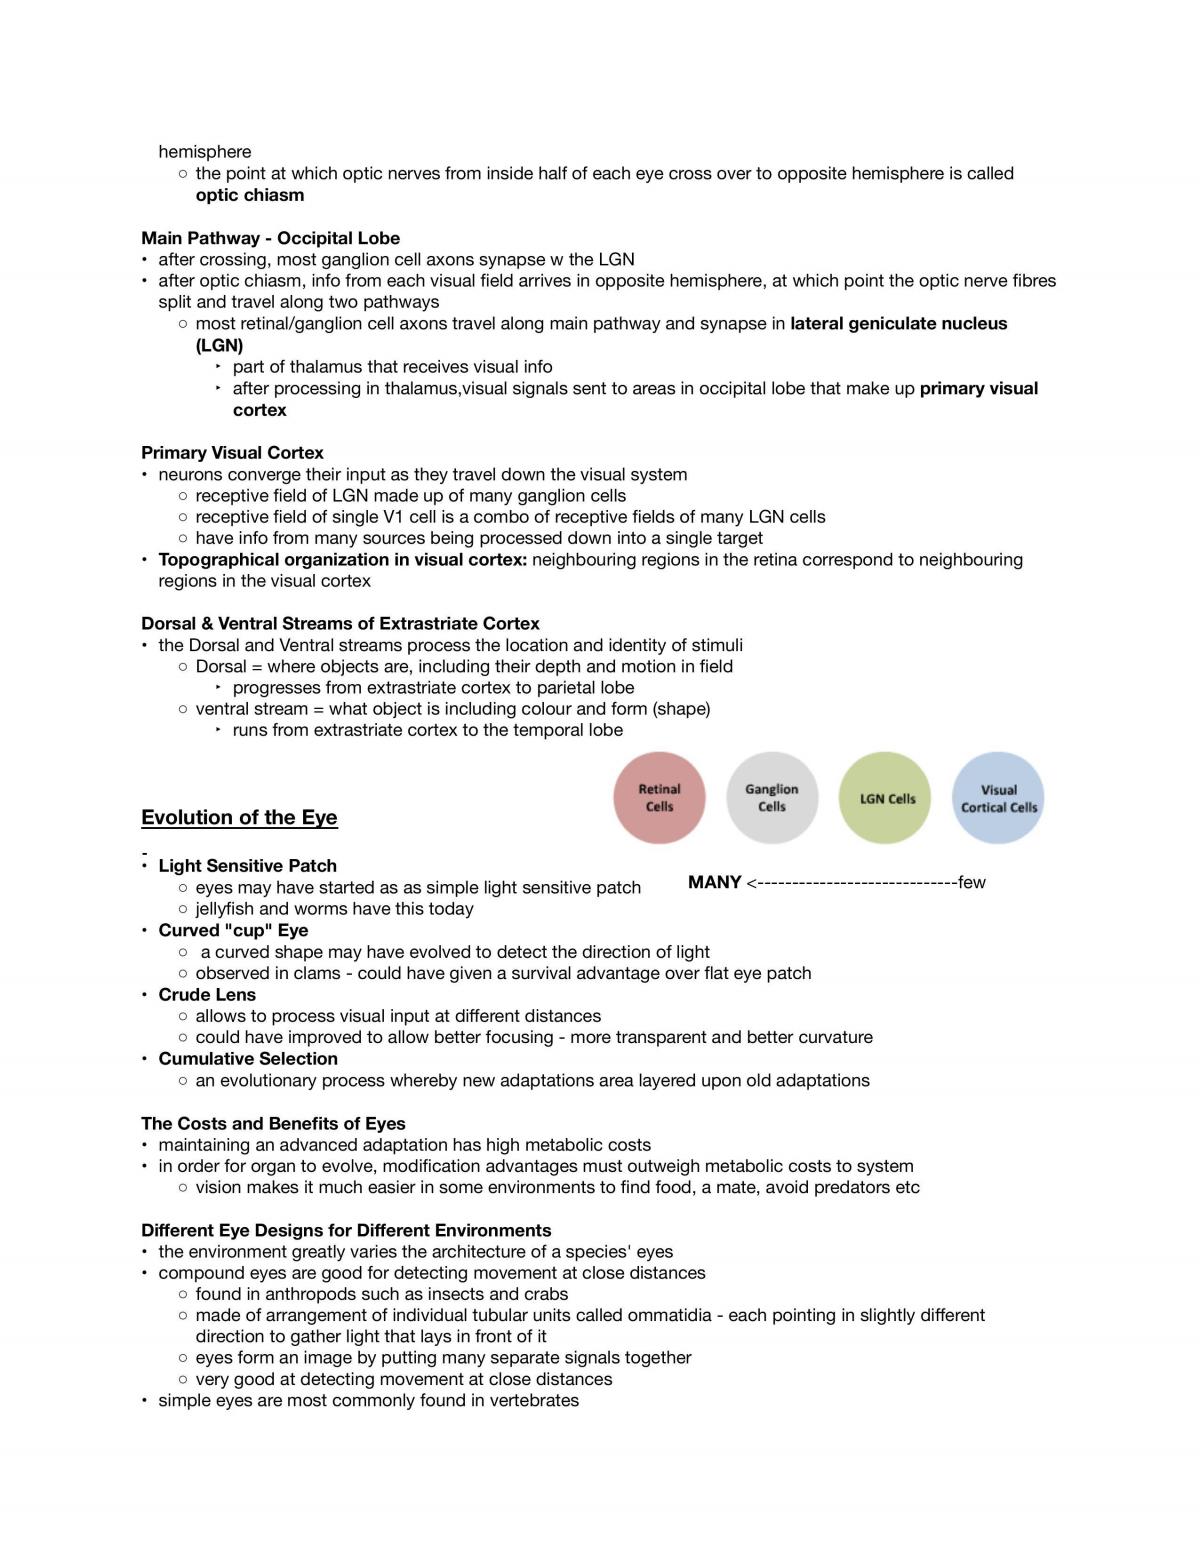 Complete Neuroscience Module Notes - Page 37